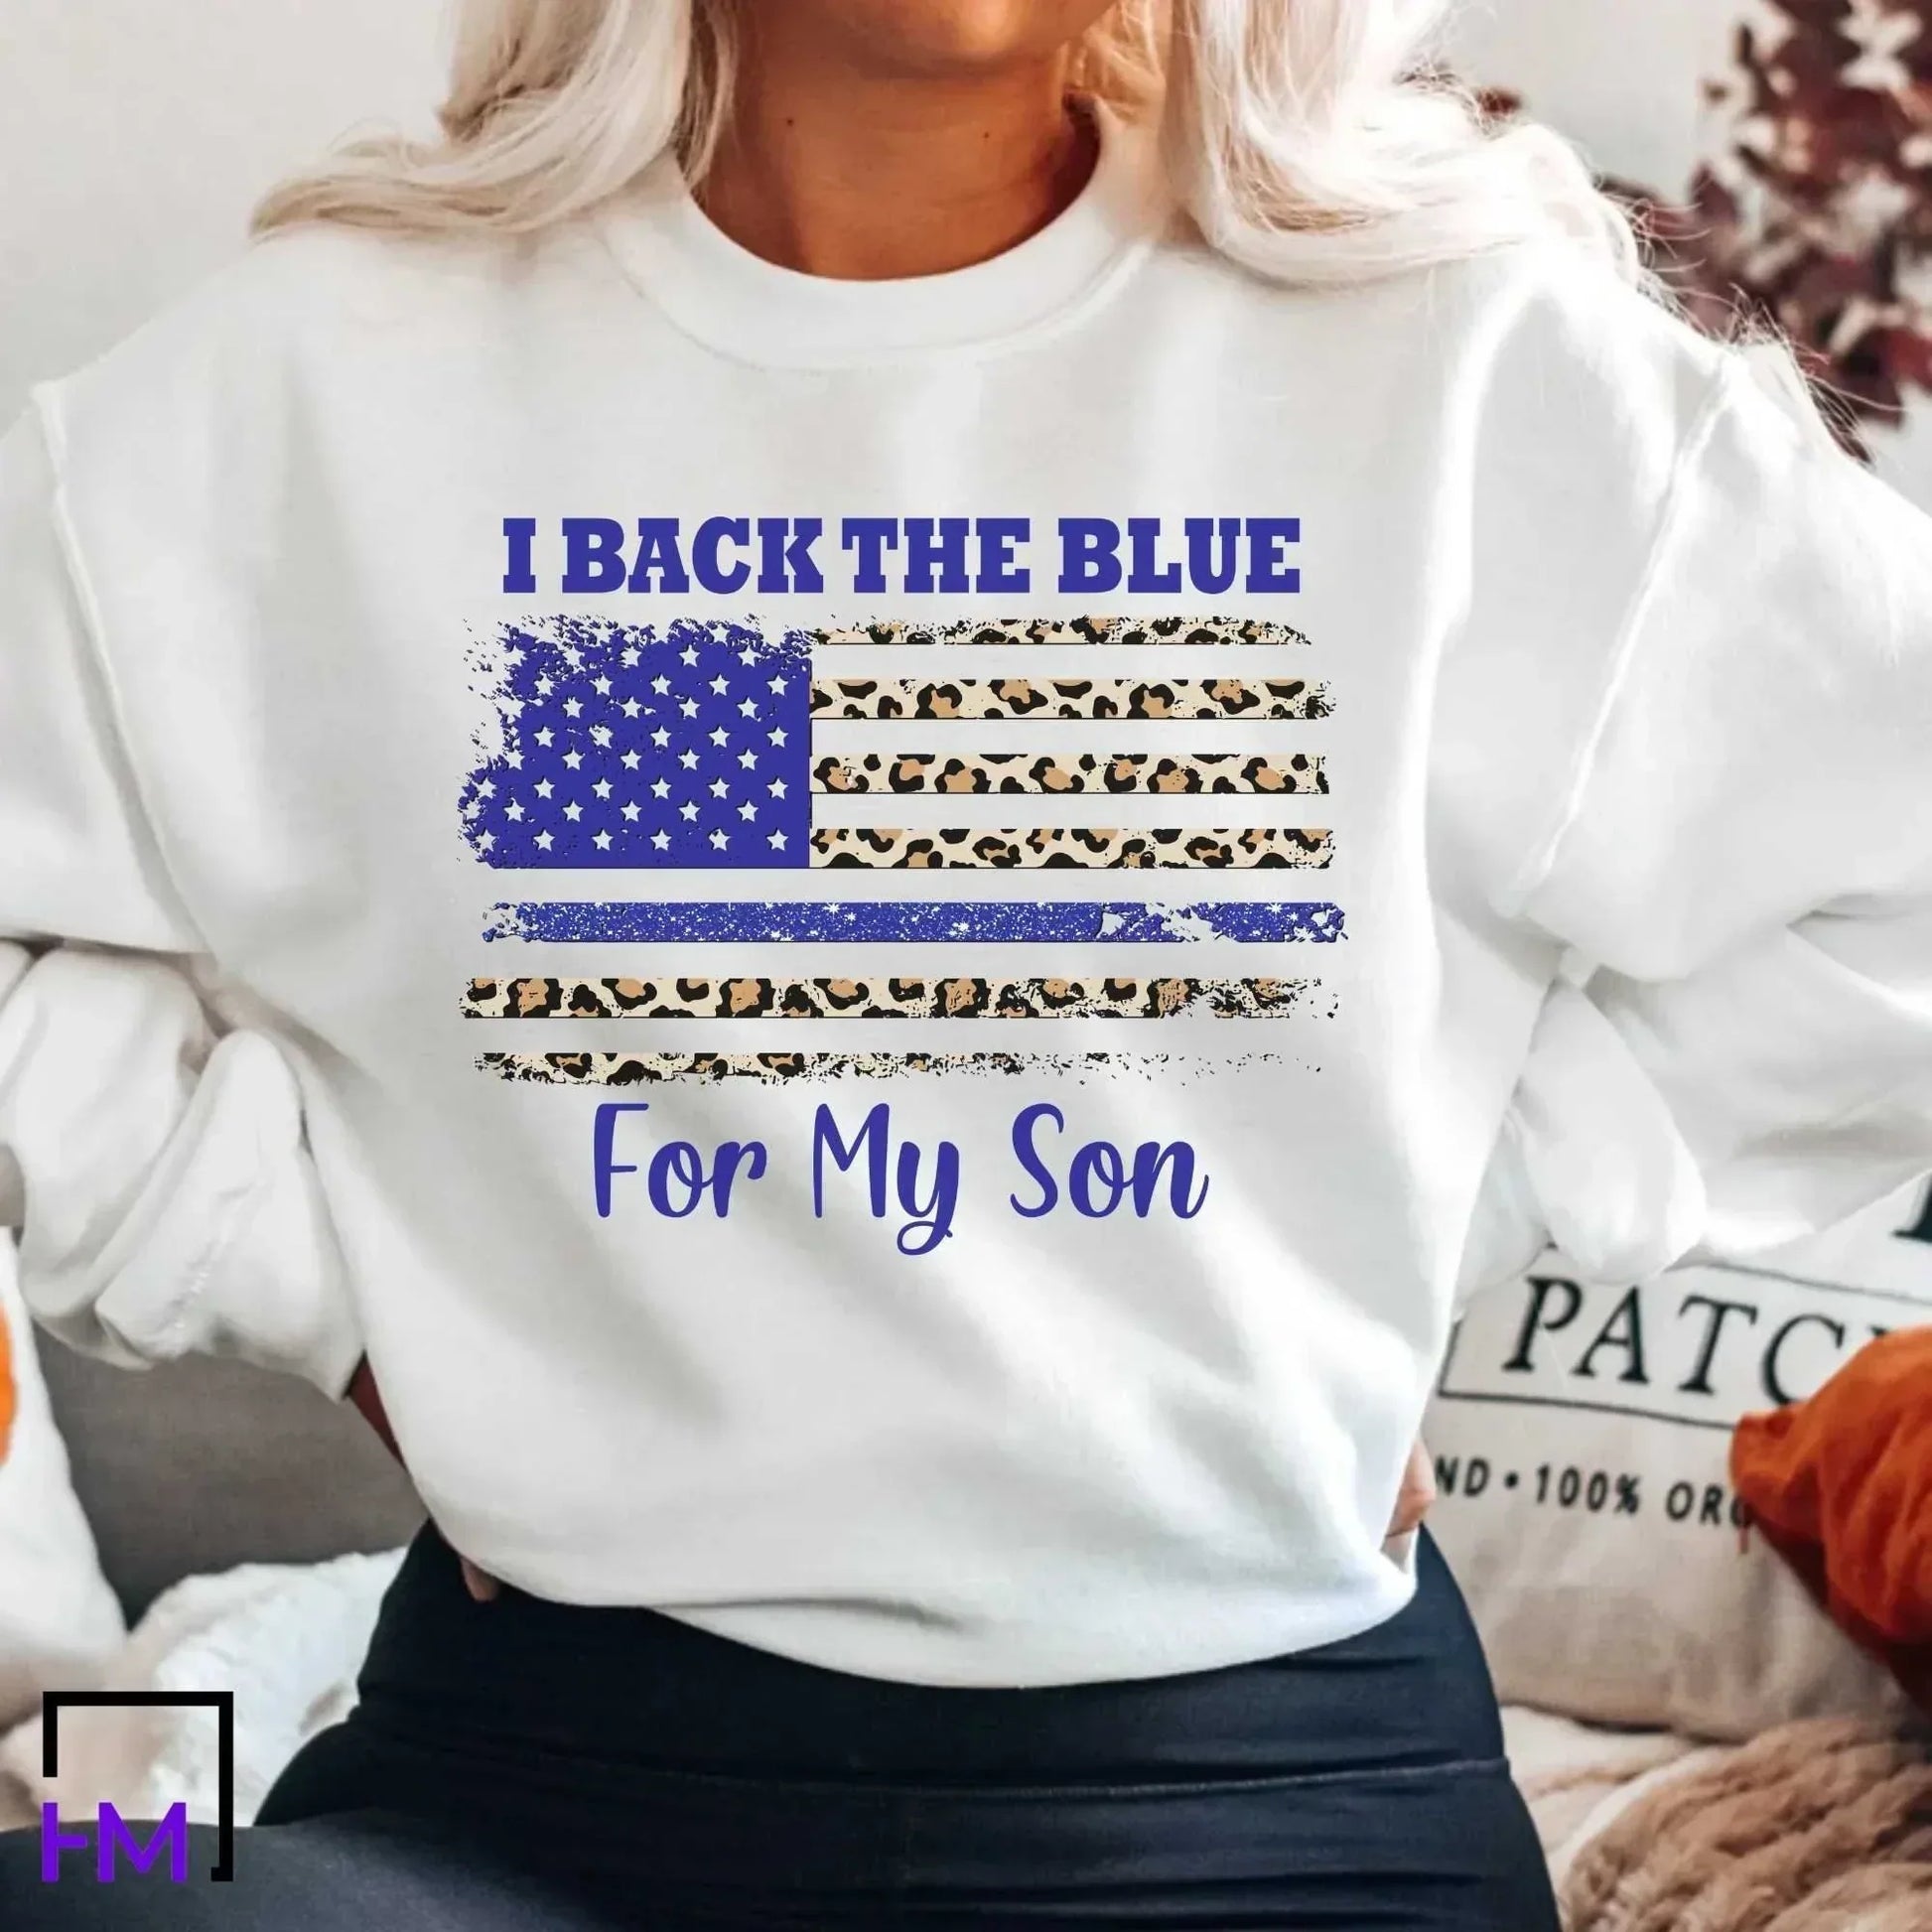 Police Shirt for Women, Police Wife Shirt, Police Mom Shirt, Police Mom Gift, Thin Blue Line Shirt, Gift for Police's Wife, Police Officer